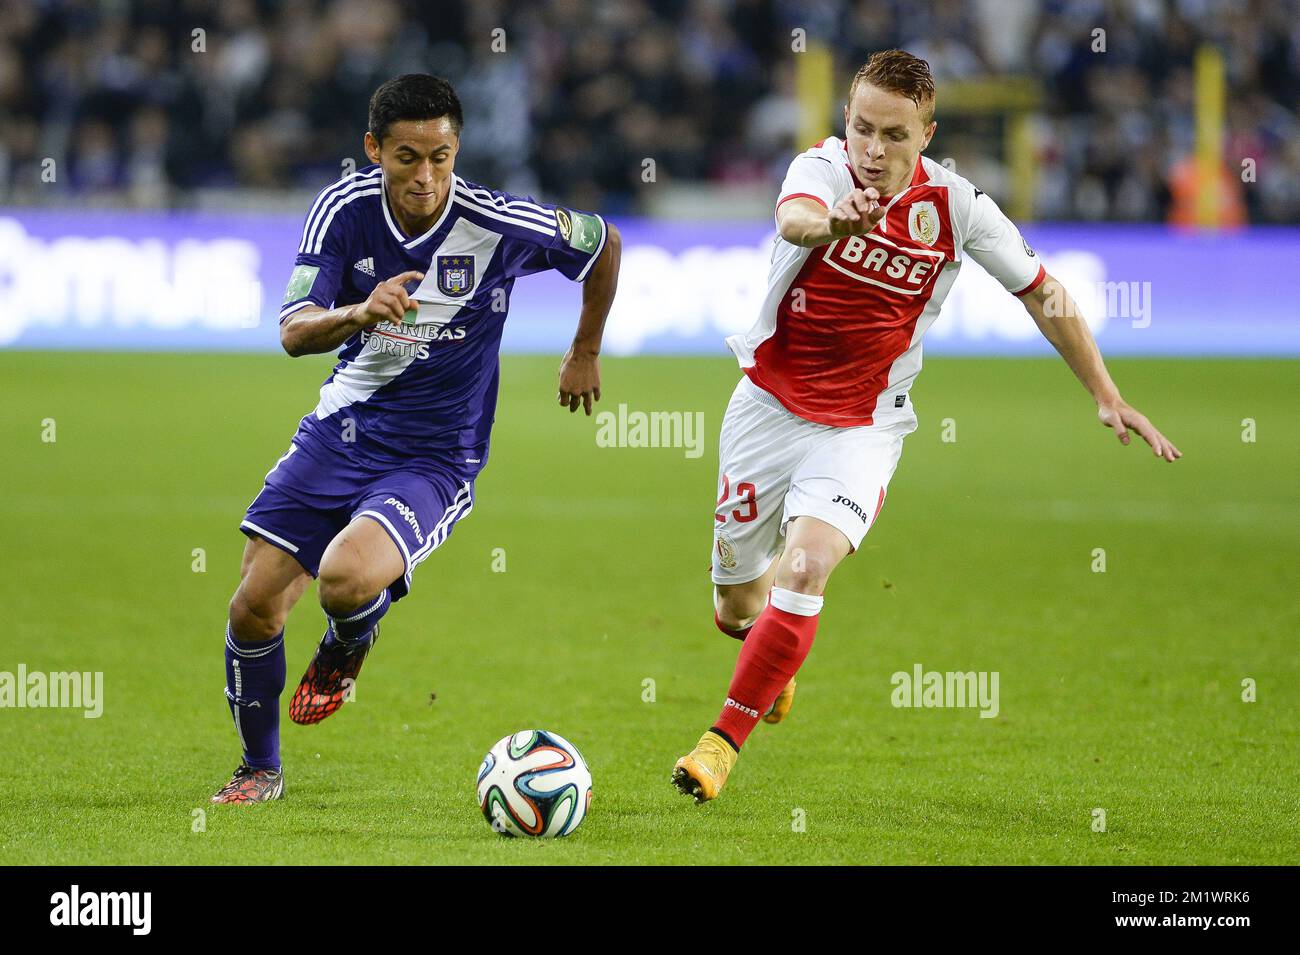 20141026 - BRUSSELS, BELGIUM: Anderlecht's Andy Najar and Standard's Adrien Trebel fight for the ball during the Jupiler Pro League match between RSC Anderlecht and Standard de Liege, in Brussels, Sunday 26 October 2014, on day 12 of the Belgian soccer championship. BELGA PHOTO LAURIE DIEFFEMBACQ Stock Photo